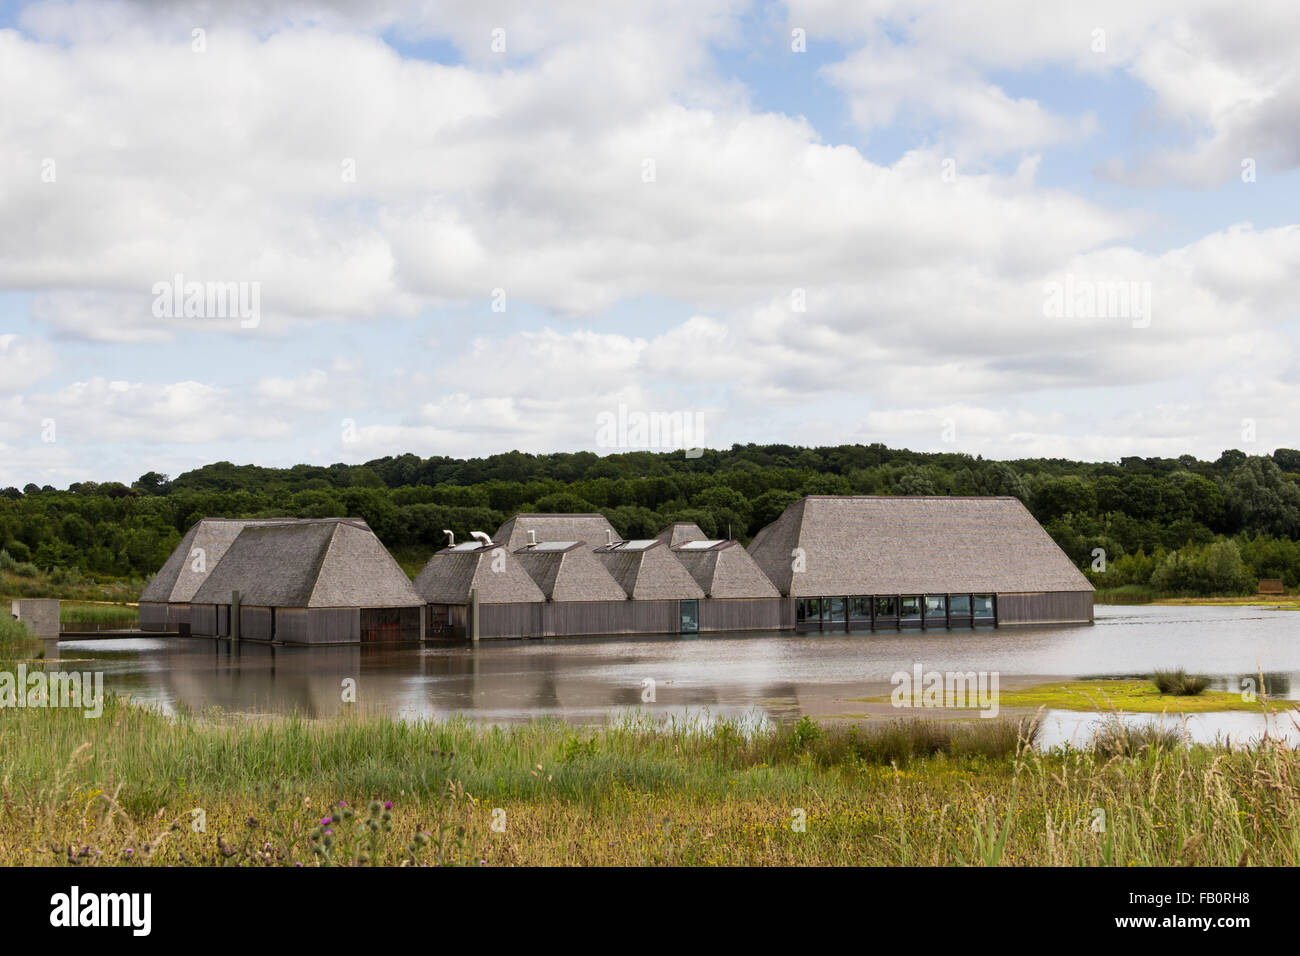 The visitor centre at Brockholes nature reserve near Preston created by the Lancashire Wildlife Trust from former gravel pits. Stock Photo